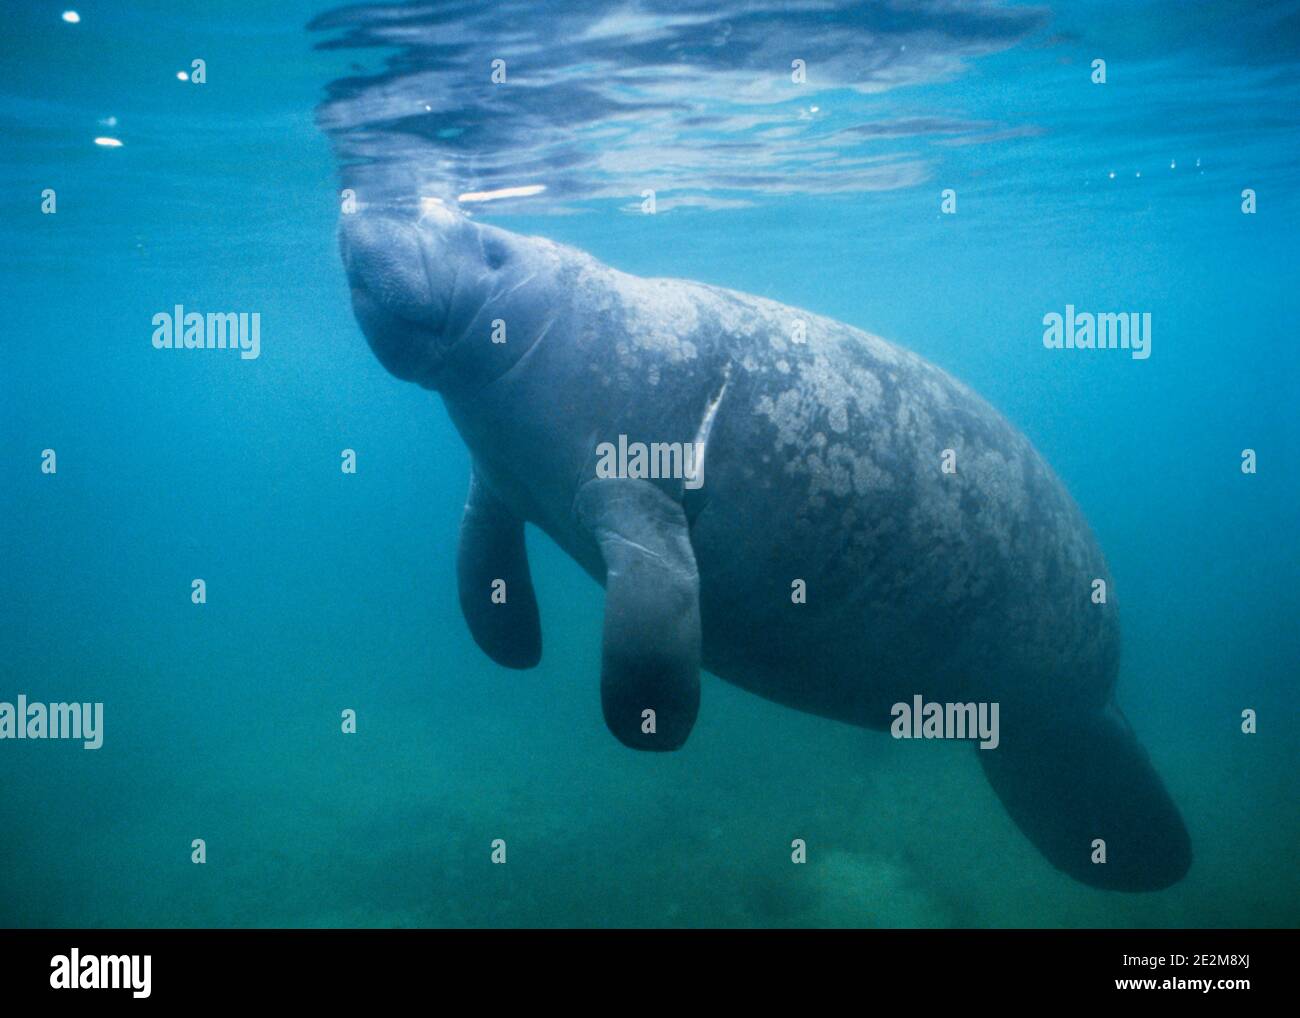 1980s SINGLE MATURE WEST INDIAN MANATEE Trichechus manatus A SOLITARY MARINE MAMMAL SWIMMING UNDERWATER FLORIDA USA - cz00592 CAM001 HARS OLD FASHIONED Stock Photo